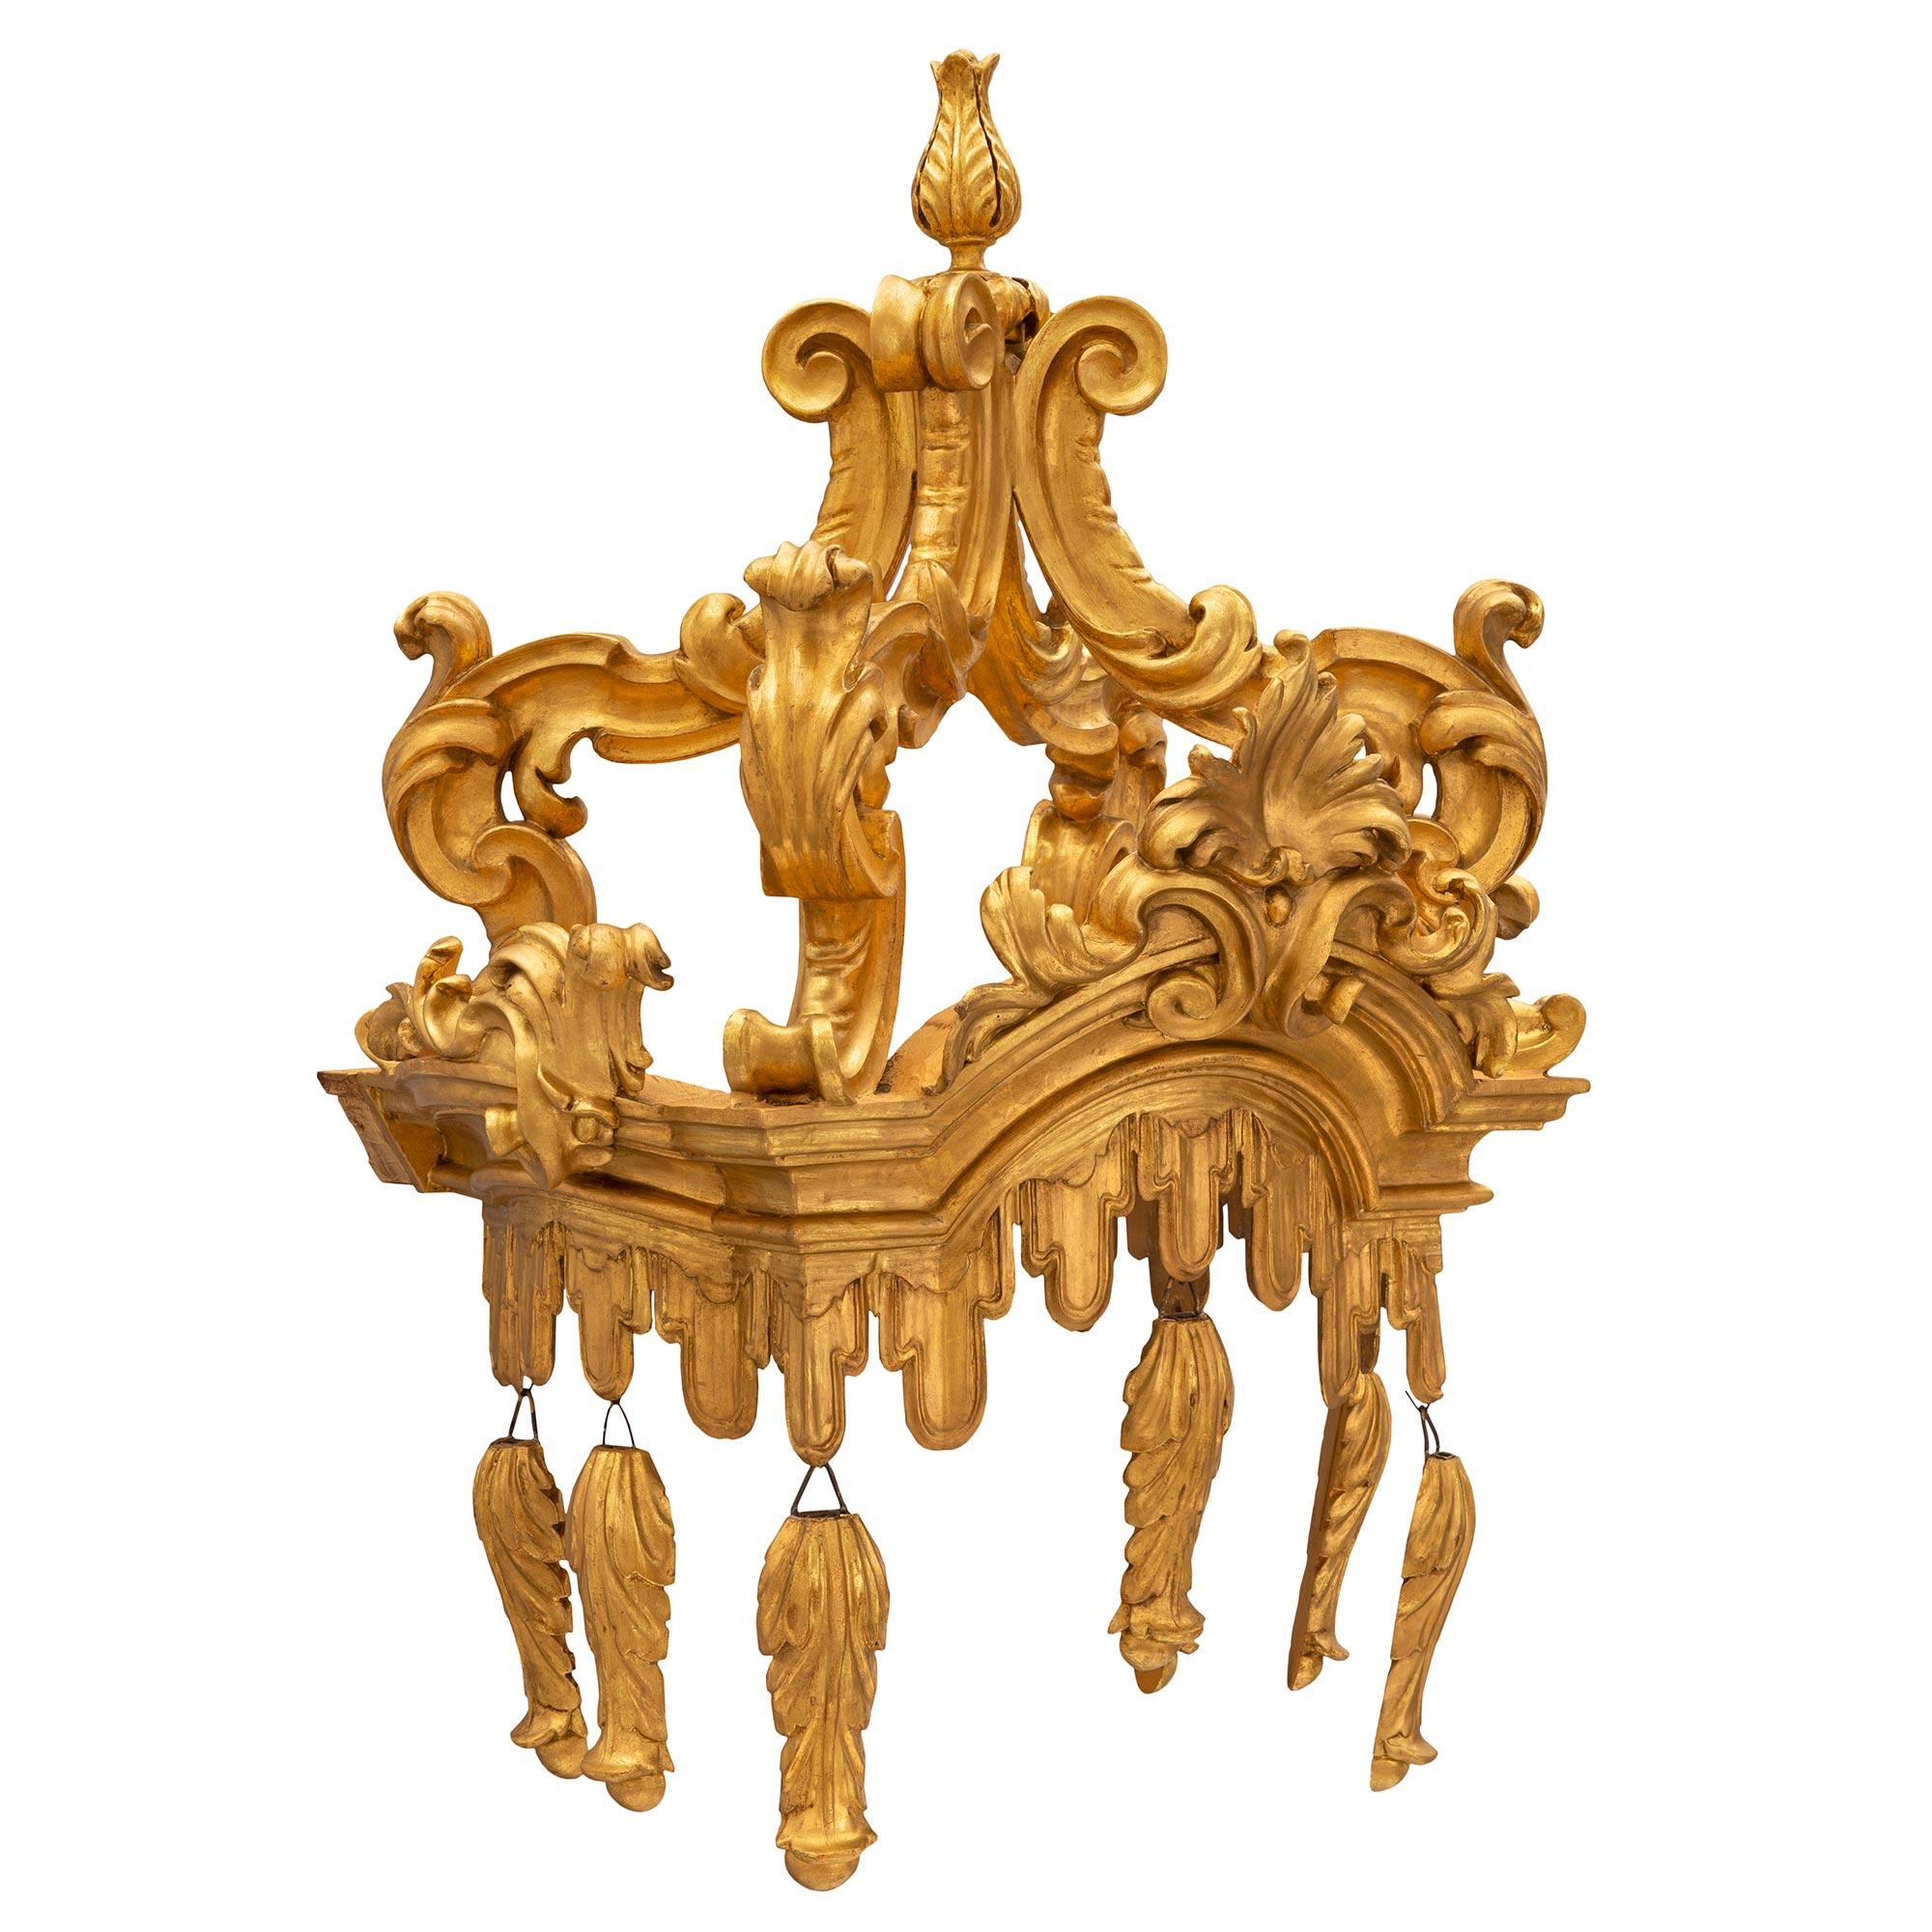 A unique and most decorative Italian 18th century Baroque st. giltwood canopy. The beautiful canopy displays richly carved giltwood acanthus leaf pendants below a draped fabric like garland design that extends along the border. At the center is a